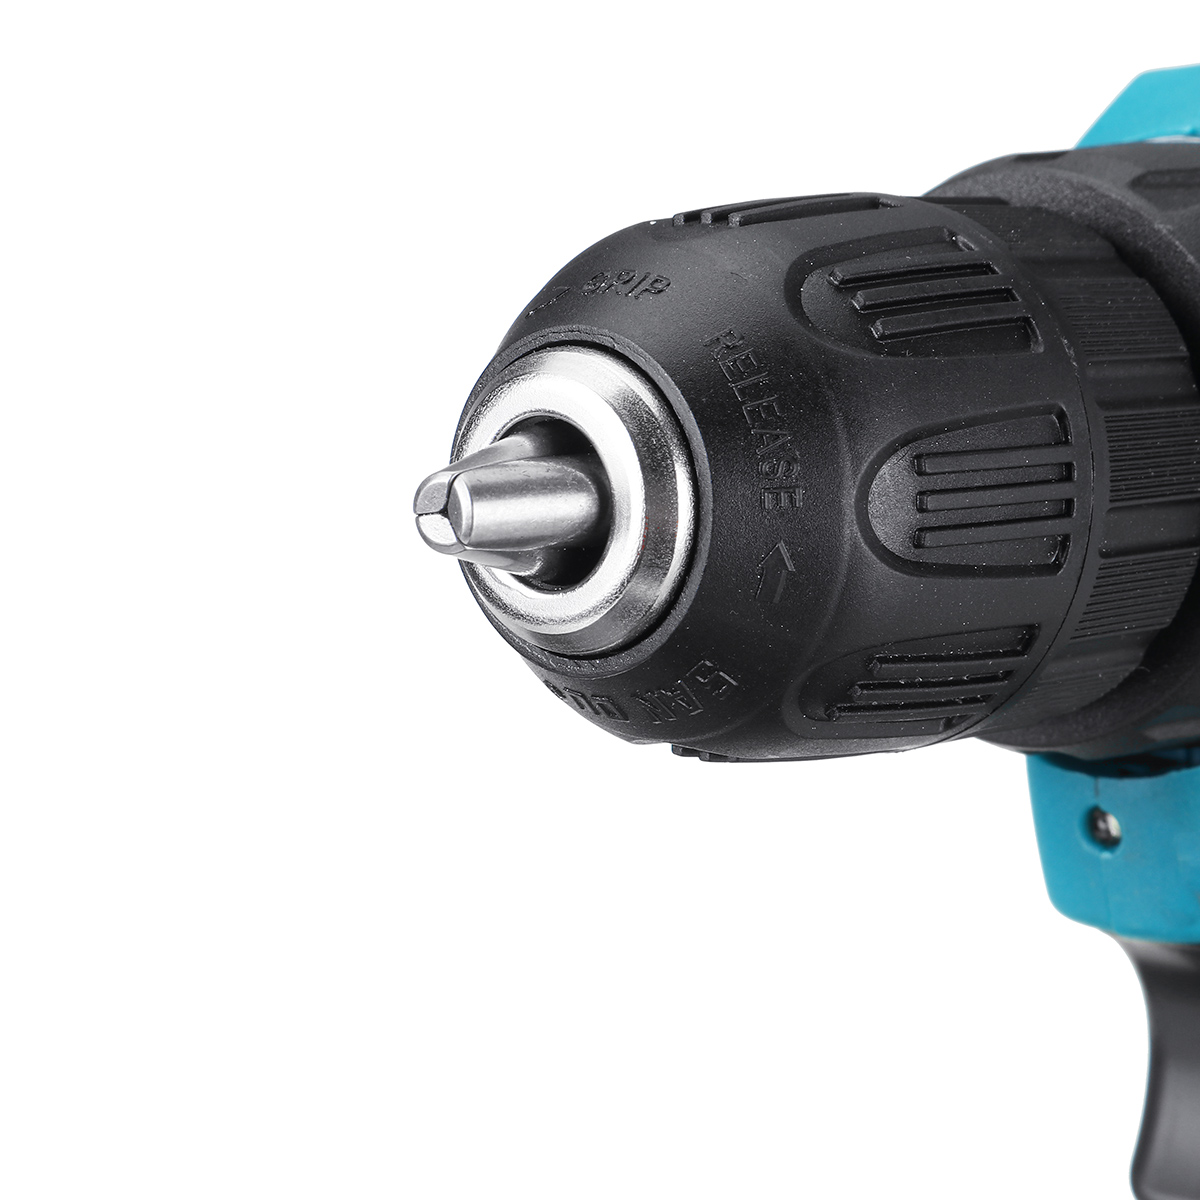 2000rpm-38Nm-21V-Lithium-Electric-Impact-Hammer-Drill-Wood-Drilling-Screwdrivers-with-Battery-1943477-24